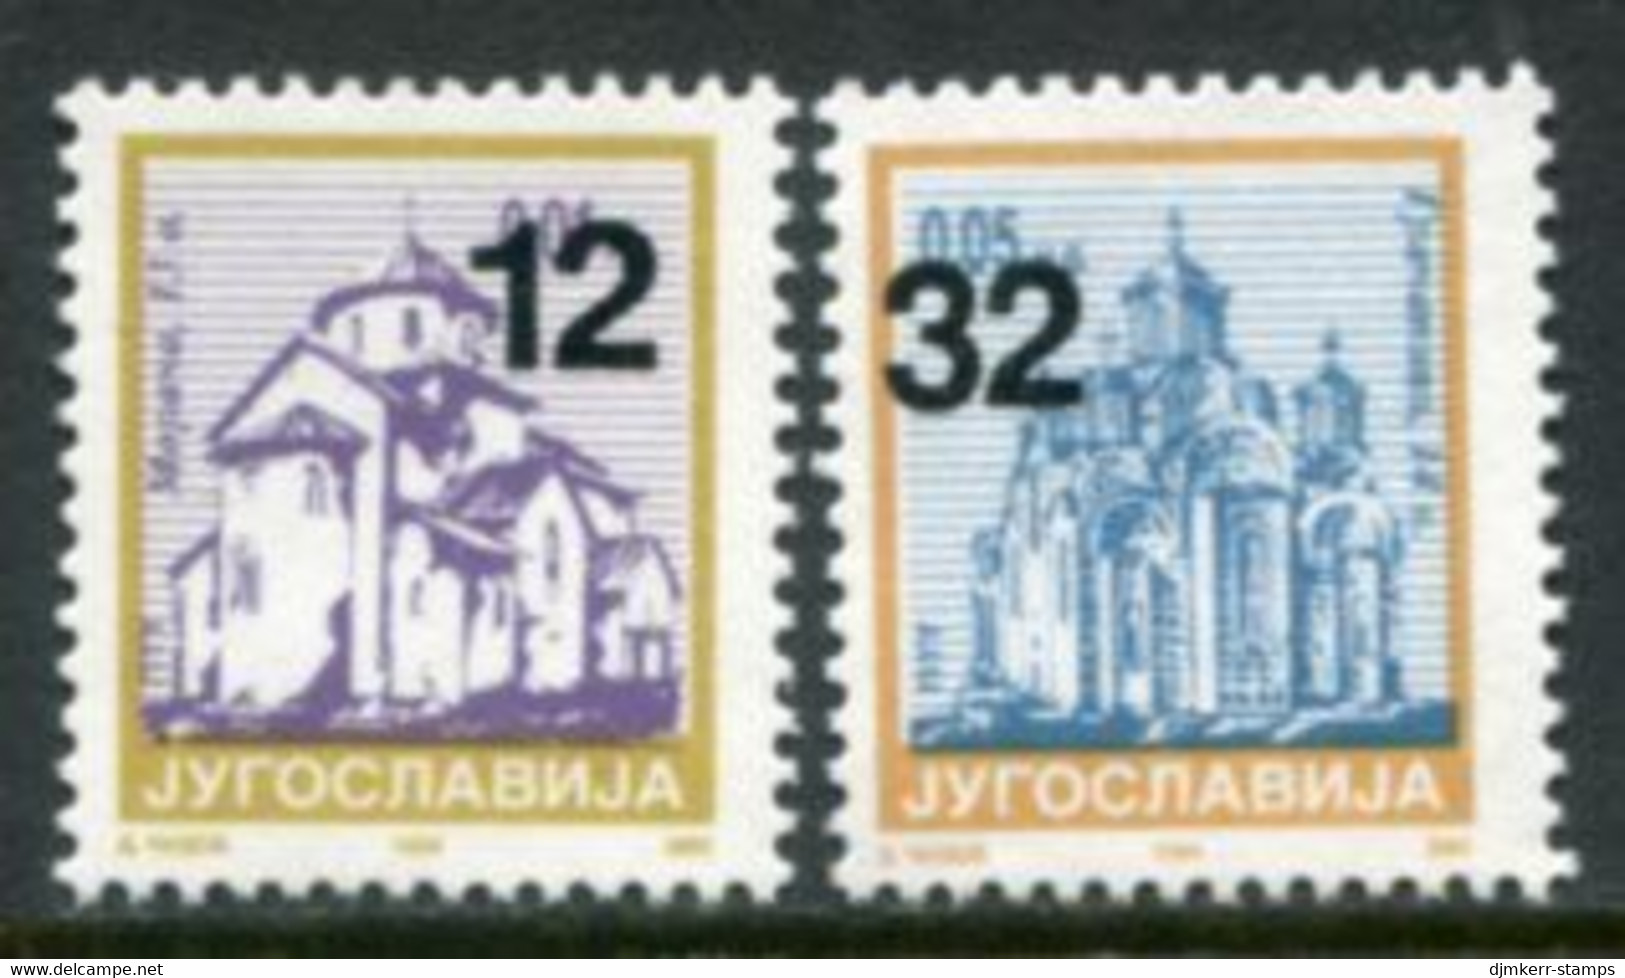 YUGOSLAVIA (Serbia & Montenegro) 2004  Surcharges 12 And 32 ND Perforated 12½  MNH / **  Michel 3212-13C - Ongebruikt